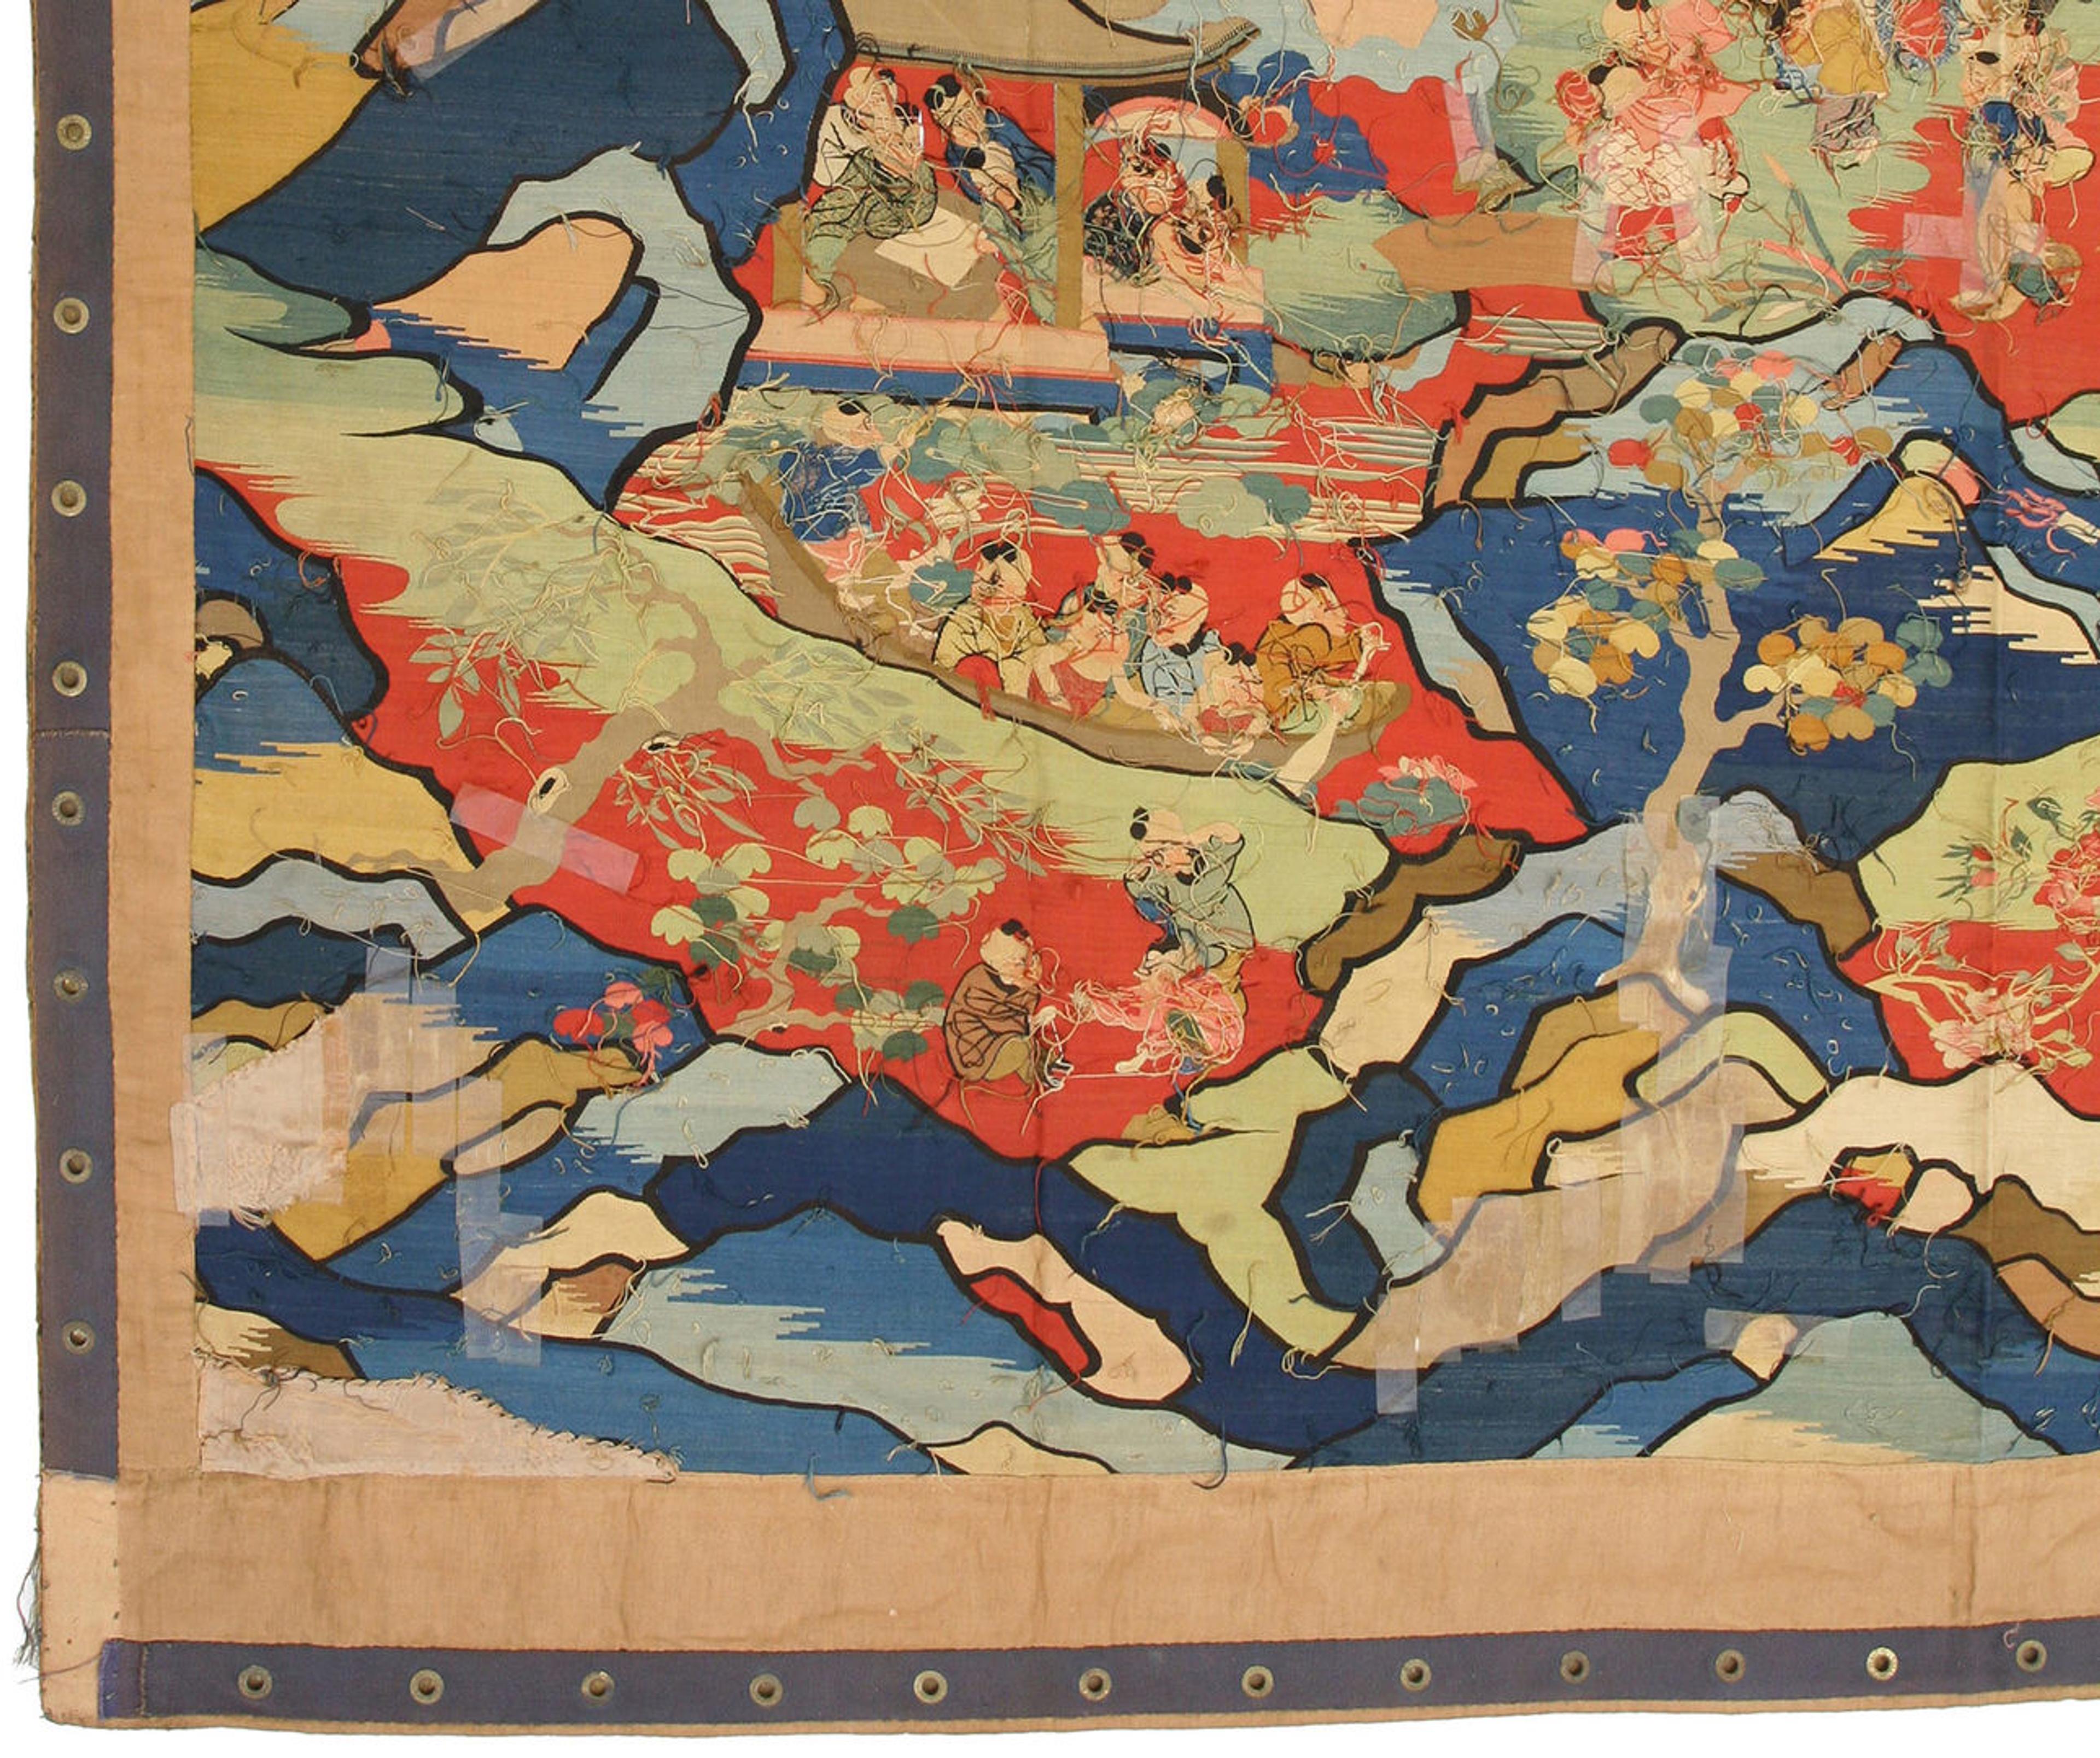 Lower right side of the tapestry, reverse side, showing tape with grommets